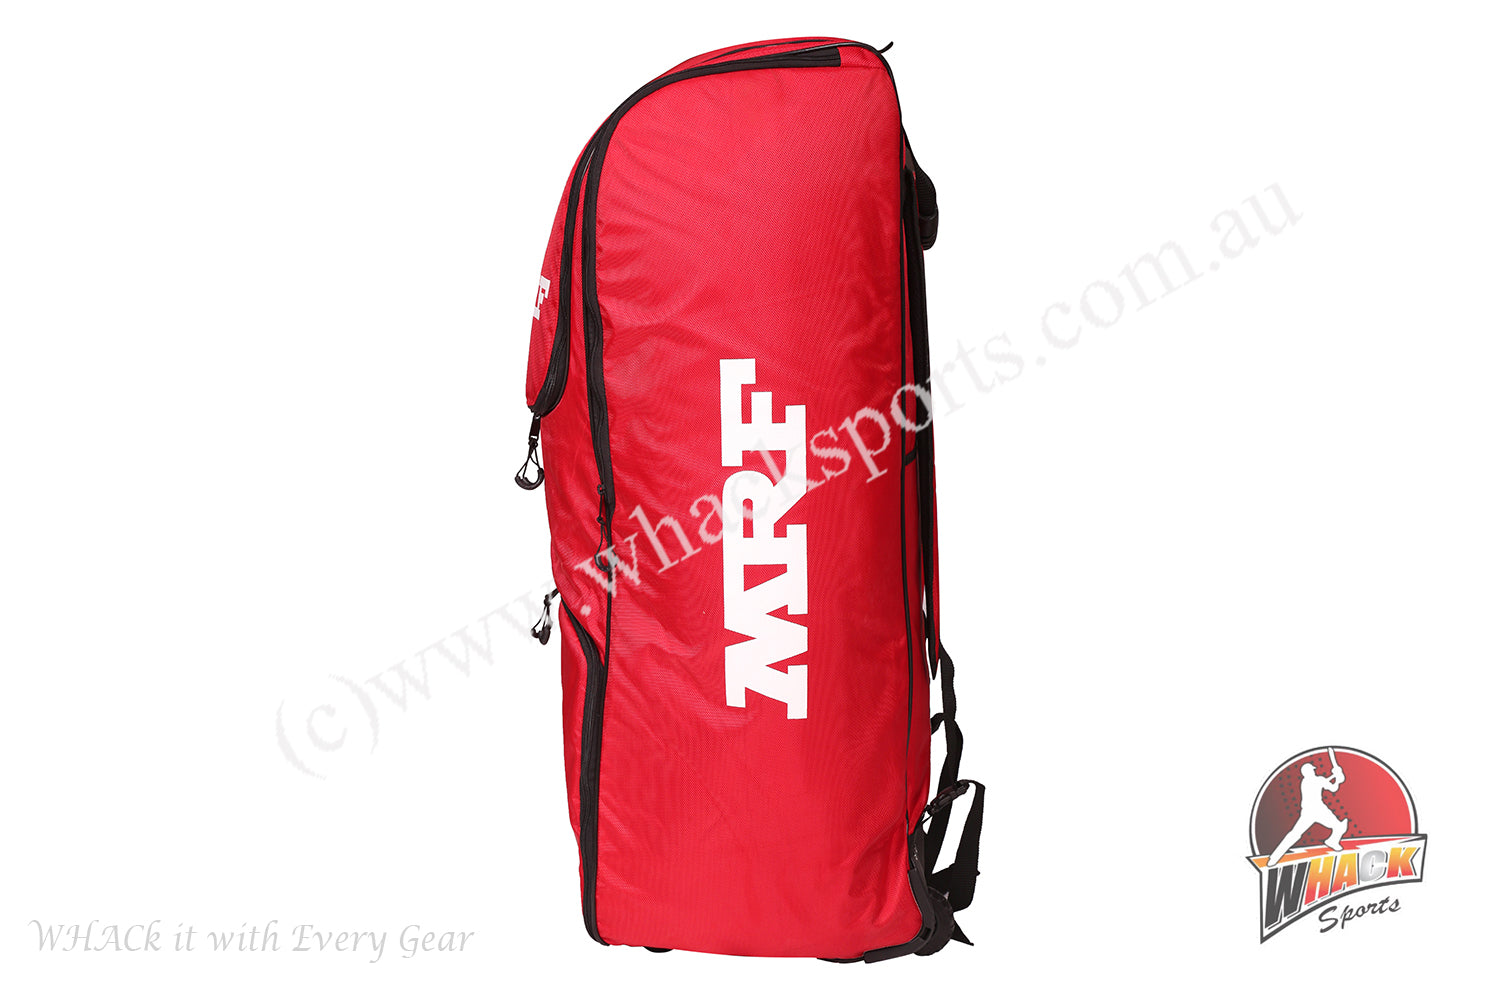 Buy new balance Club Wheelie Cricket Kit Bag Online at Low Prices in India  - Amazon.in